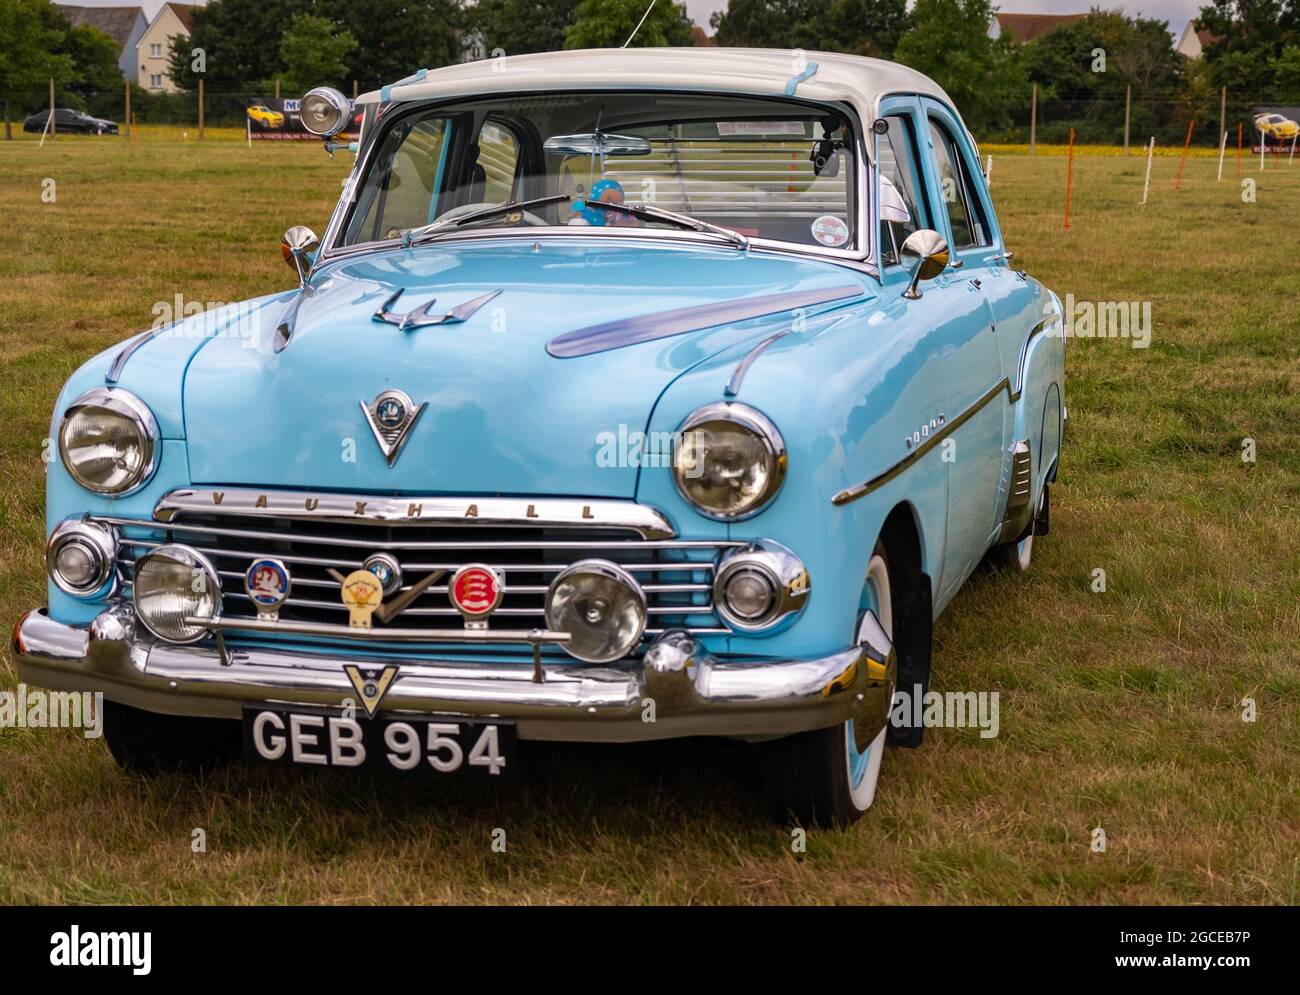 Festival of Wheels, Ipswich – July 20201. A classic and retro Vauxhall car on public display Stock Photo